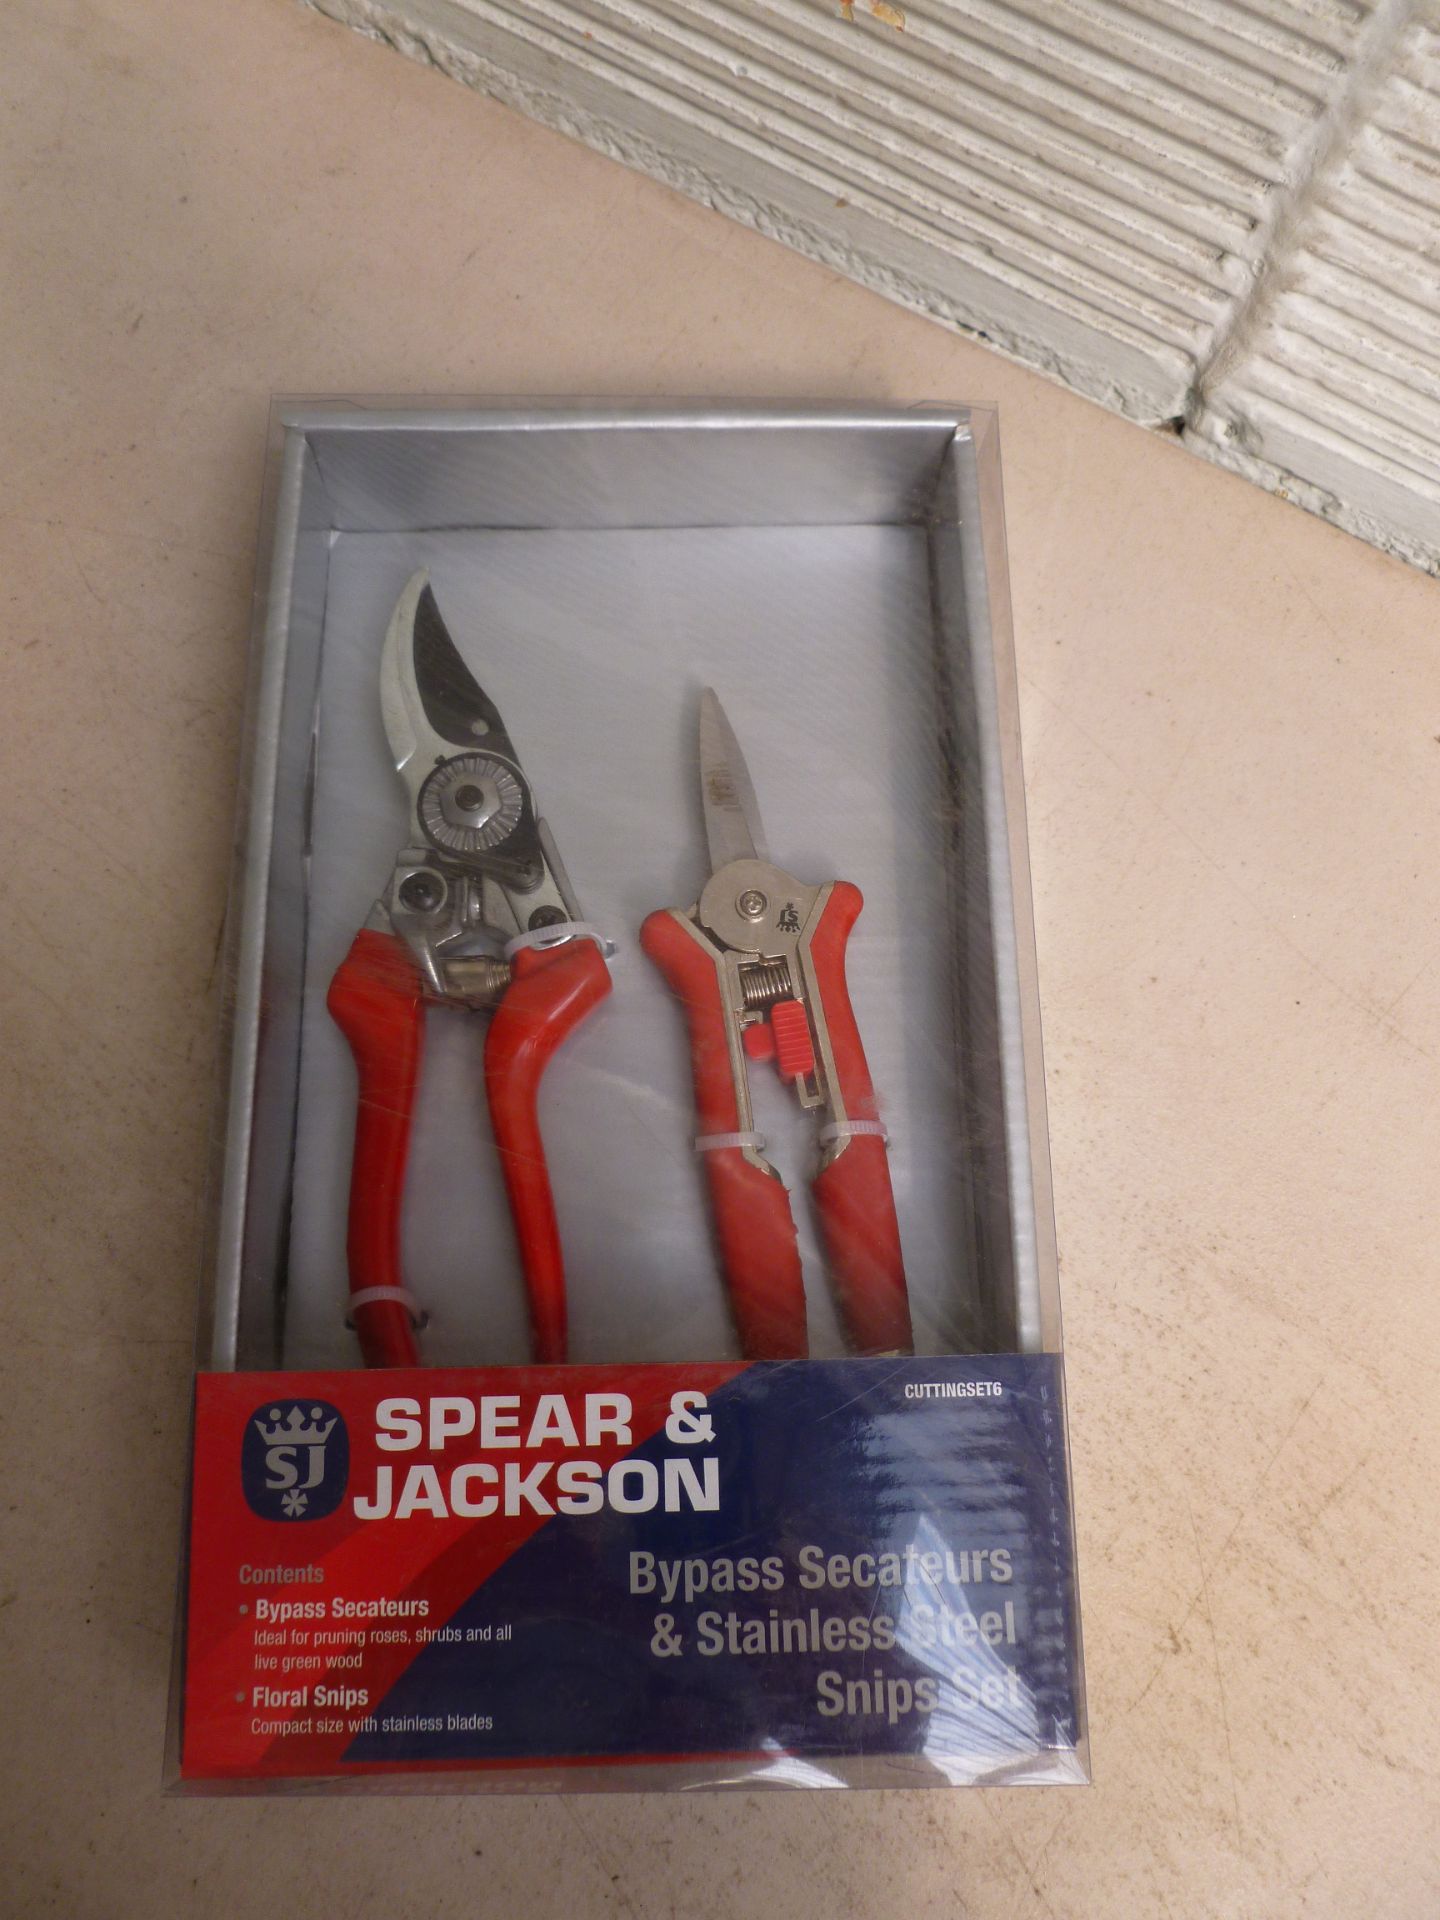 Spear&Jackson Bypass Secateurs & Stainless Steel Snips Set. New and boxed.